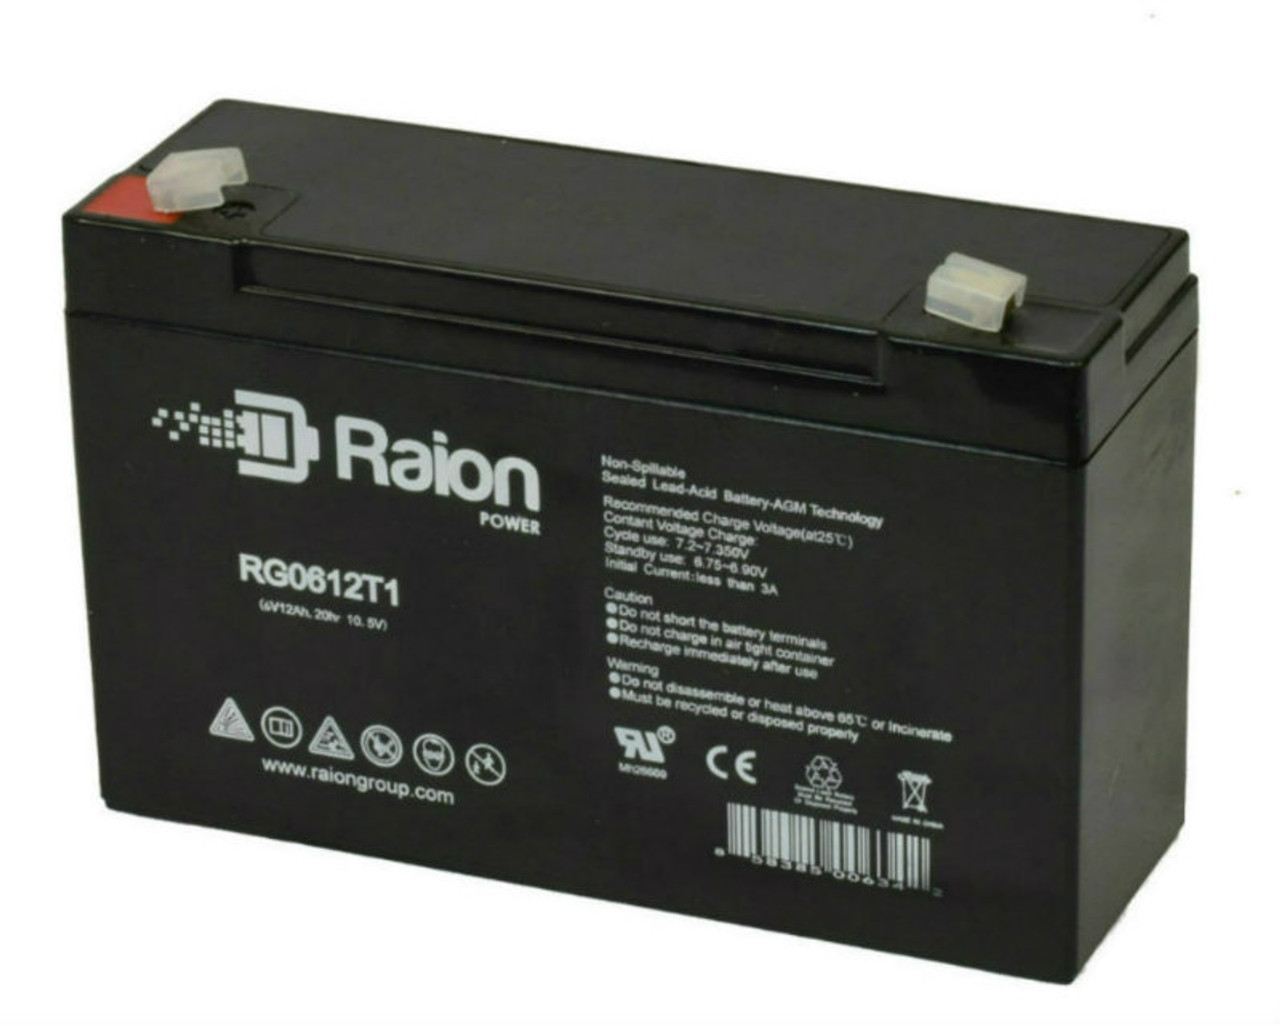 Raion Power RG06120T1 Replacement Battery for Teledyne 2CL6S8